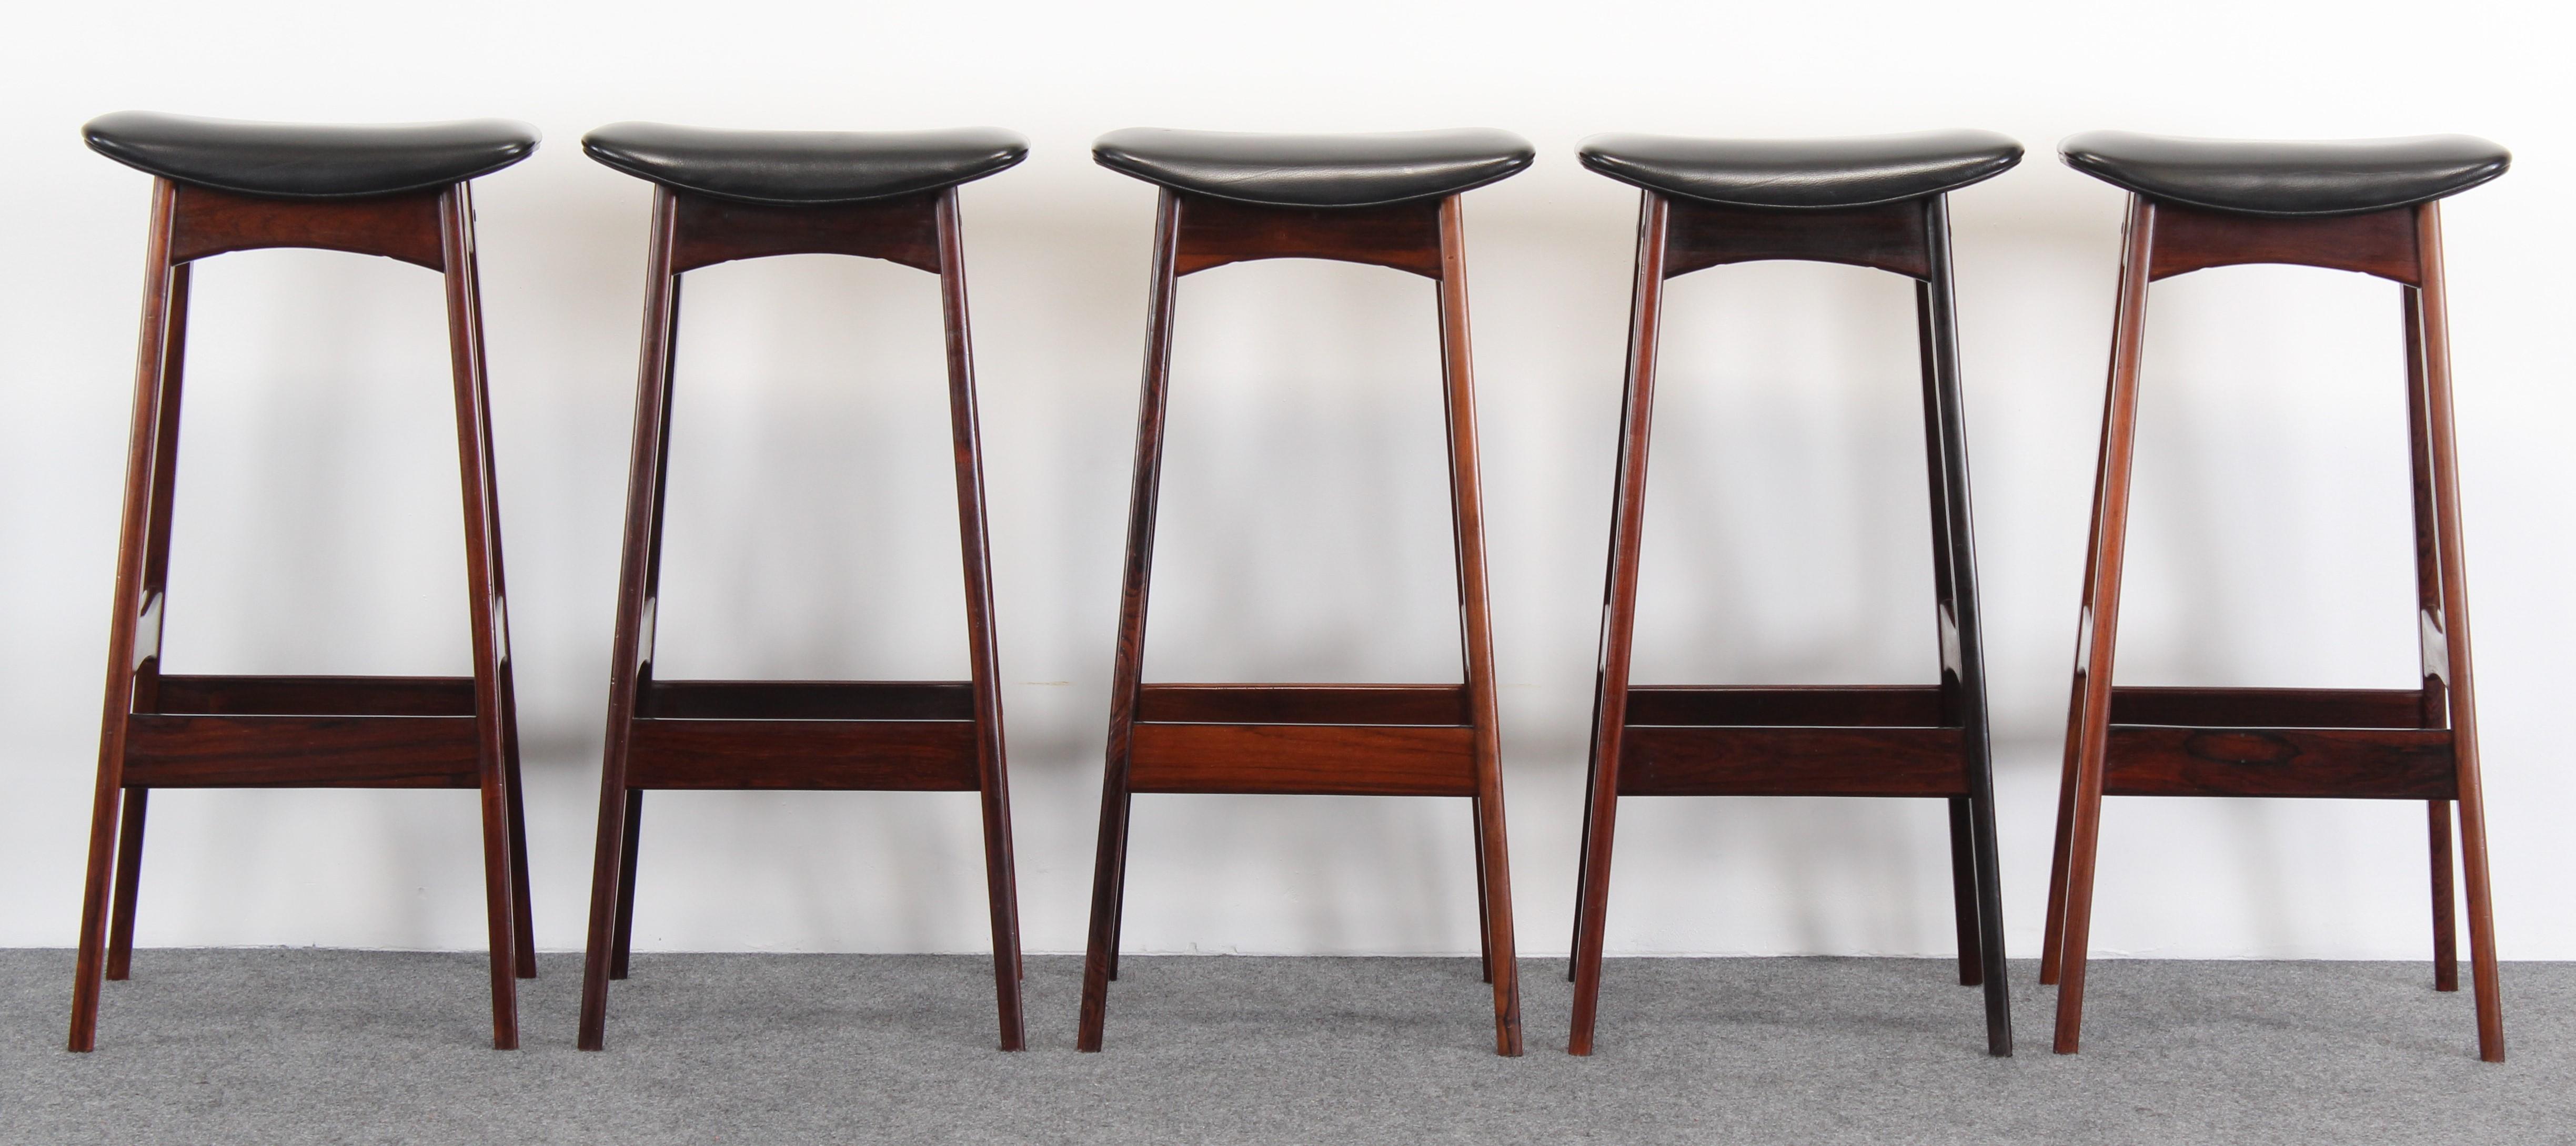 A fabulous set of five rosewood bar stools designed by Johannes Andersen manufactured by Brdr. Andersen Vejen Denmark, 1960s. These stools have the original faux leather upholstery. Very good condition with age appropriate wear.